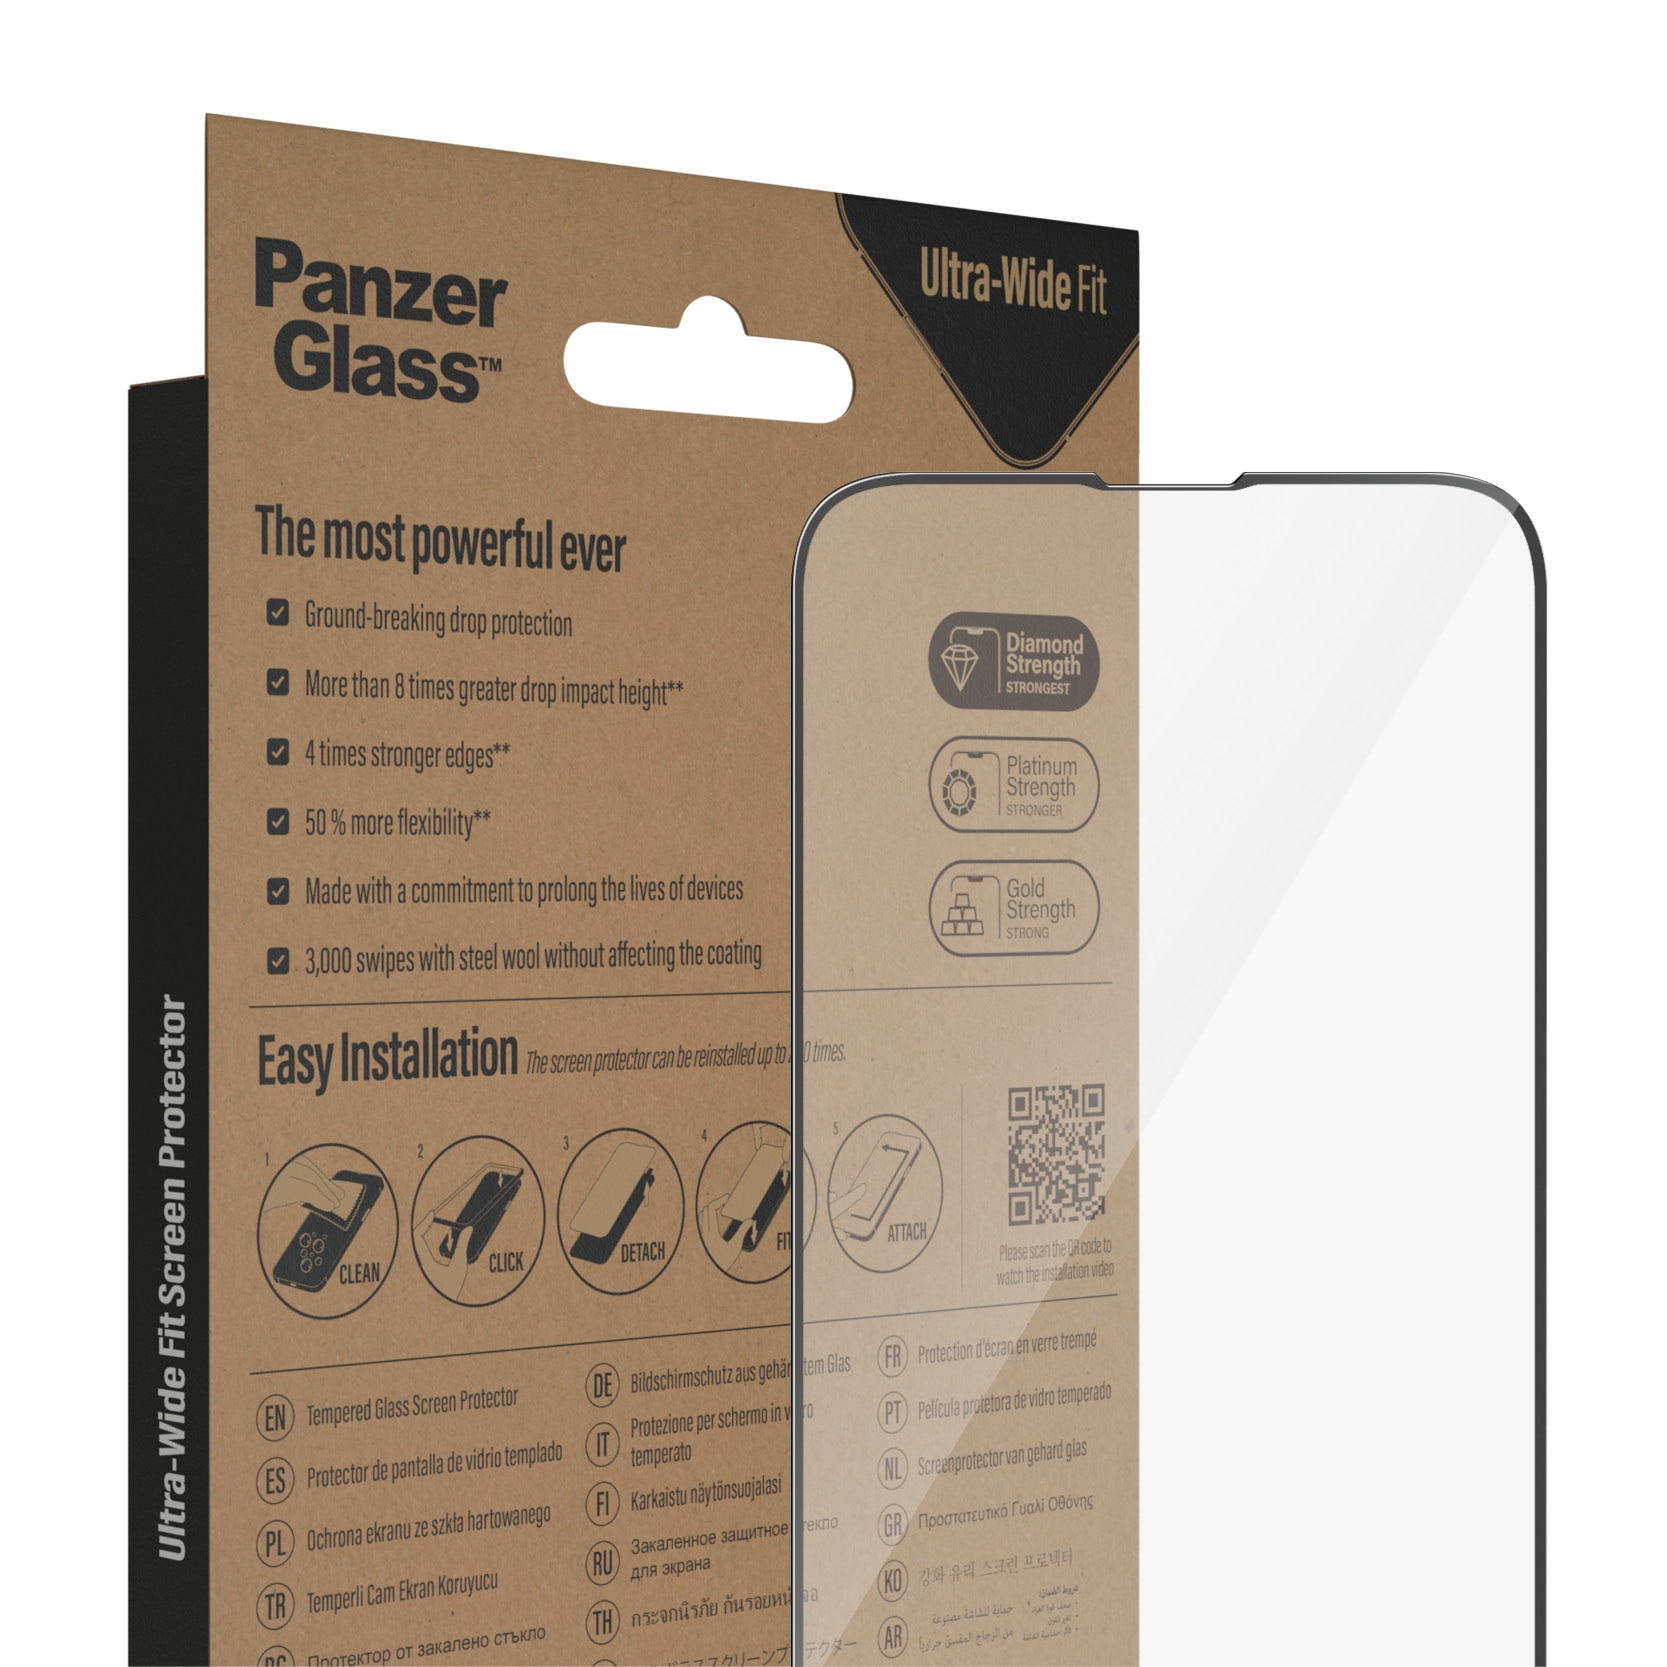 iPhone 13 Pro Screen Protector (with EasyAligner) Ultra Wide Fit